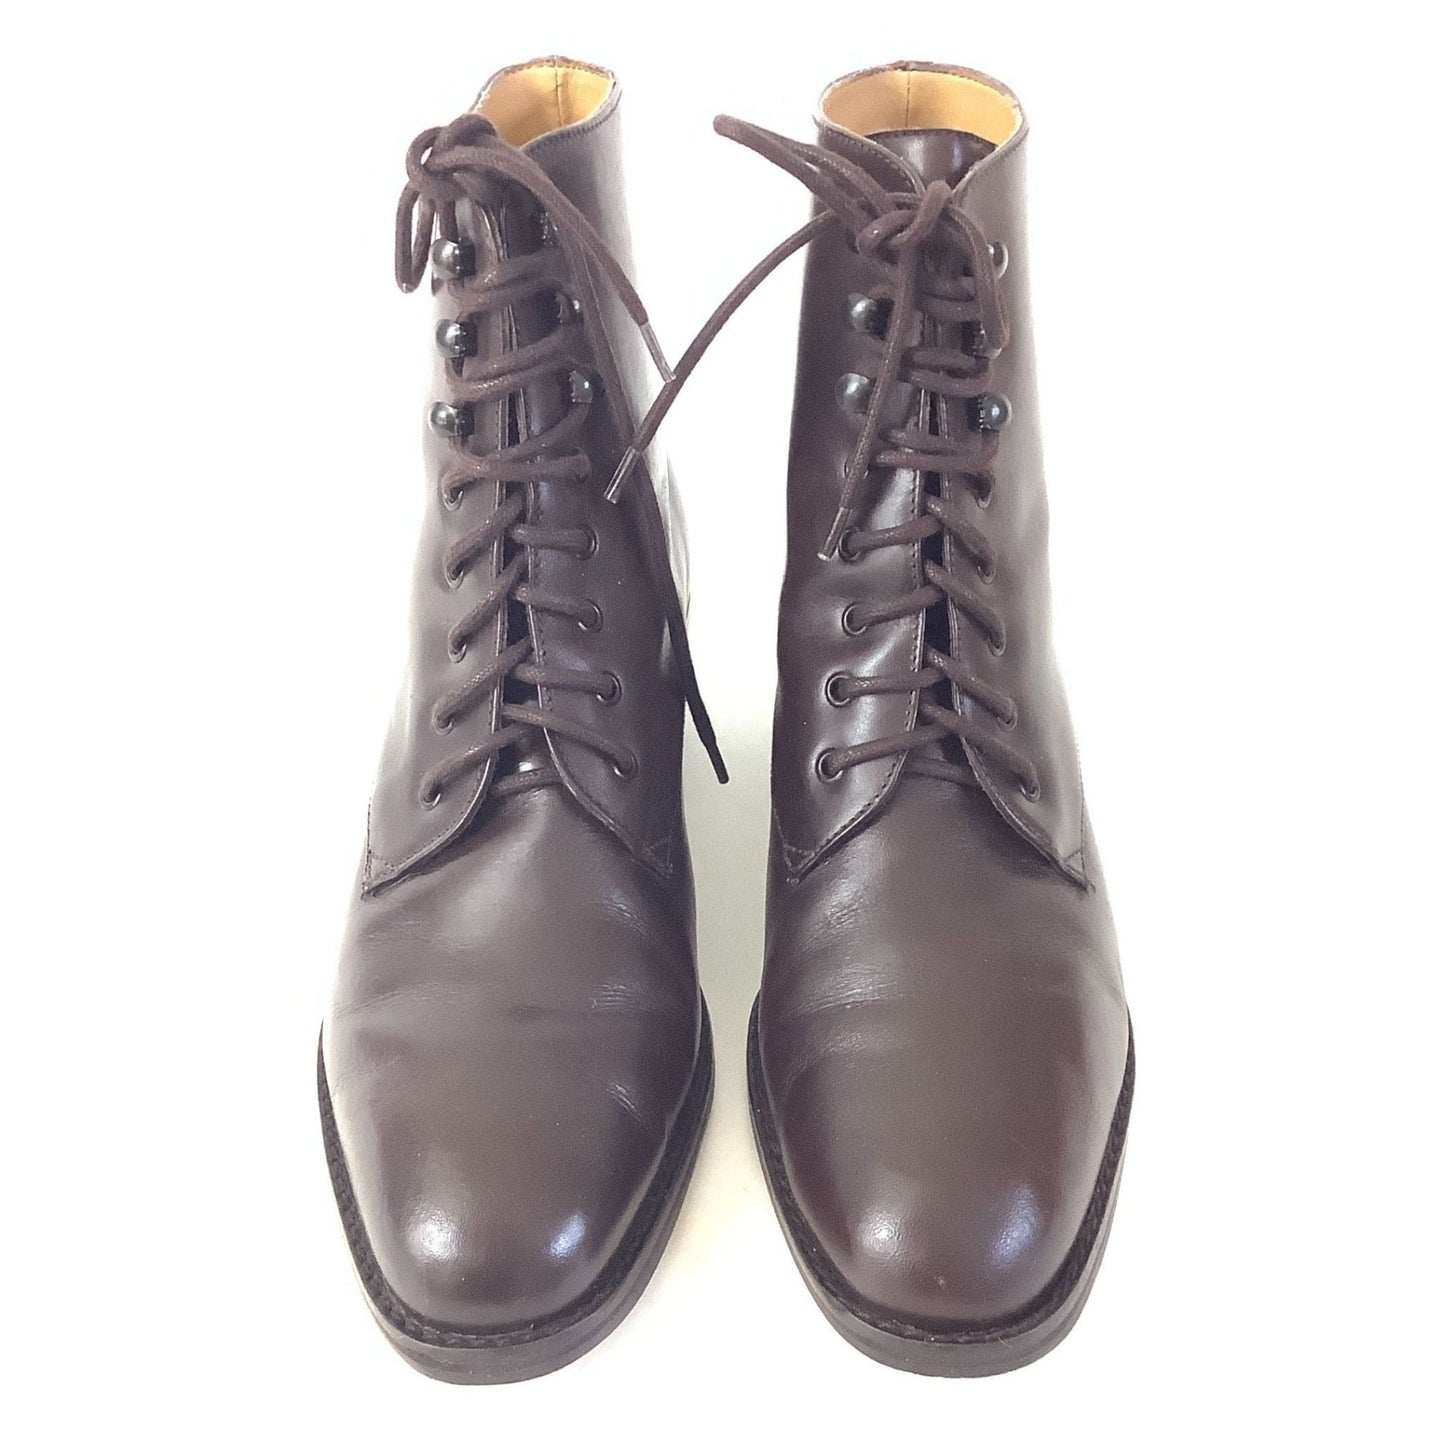 '80s Laced Ankle Boots 7 / Brown / Vintage 1980s